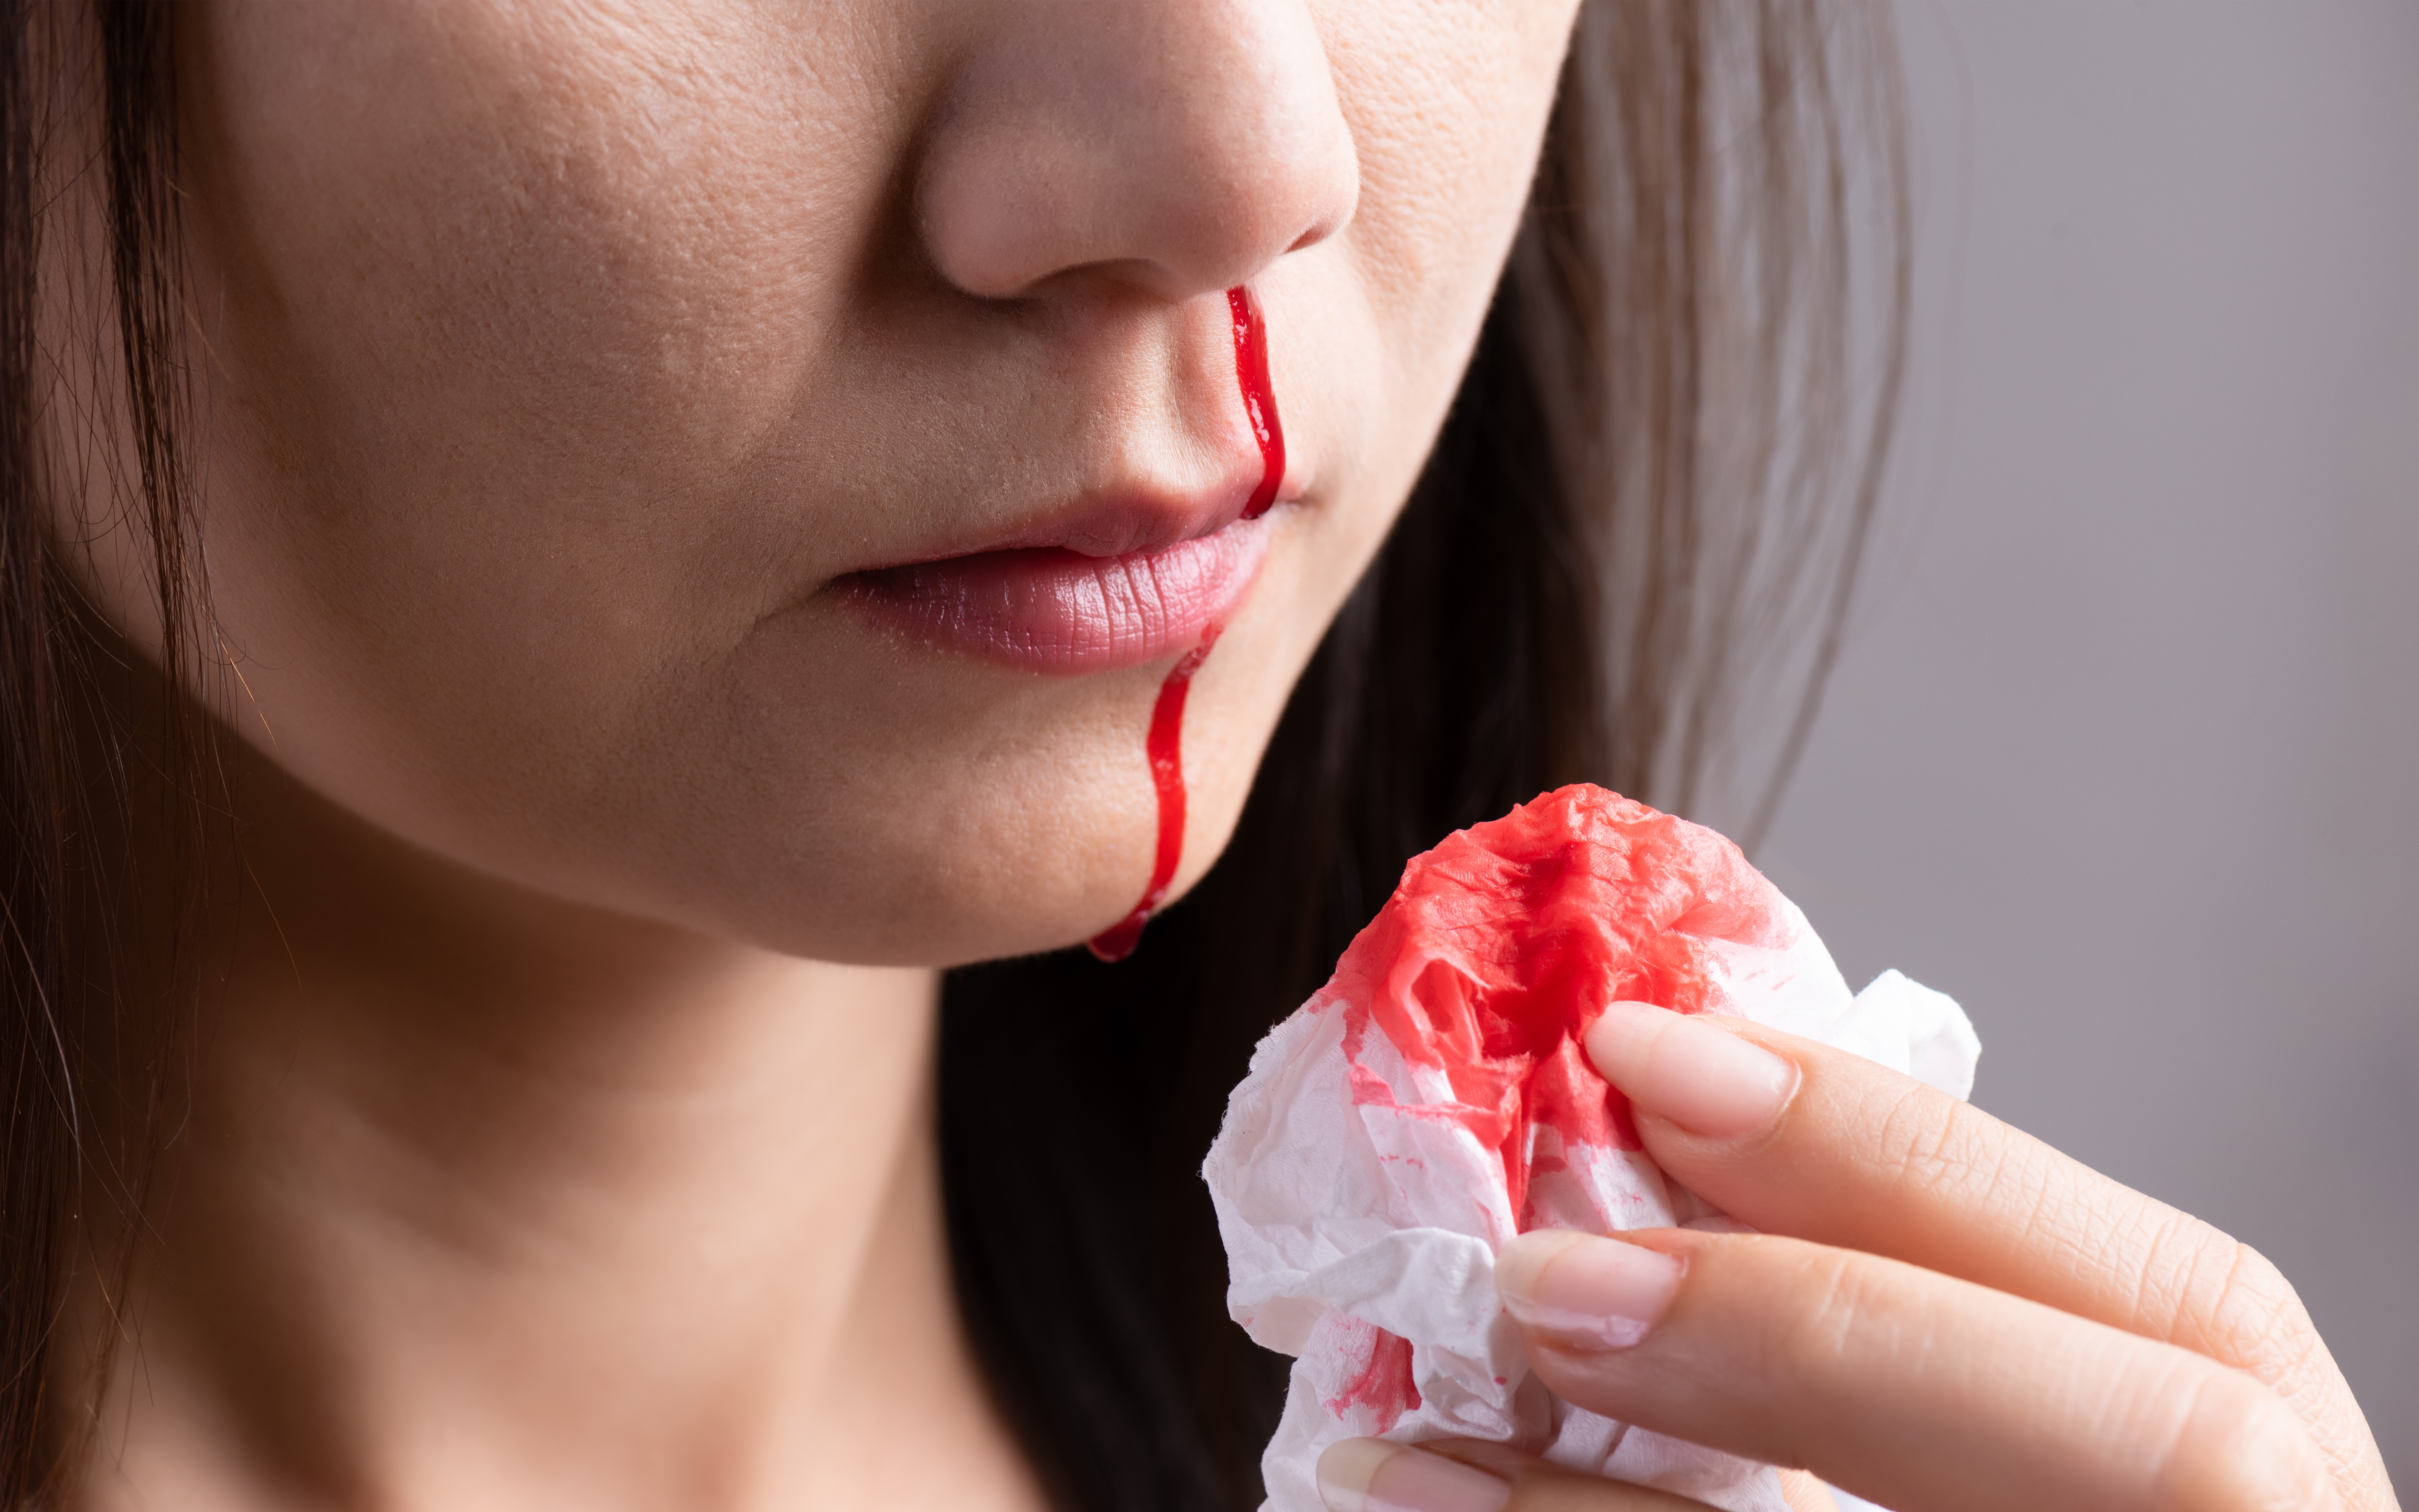 Summer Nosebleeds: Causes, Effects, and Prevention